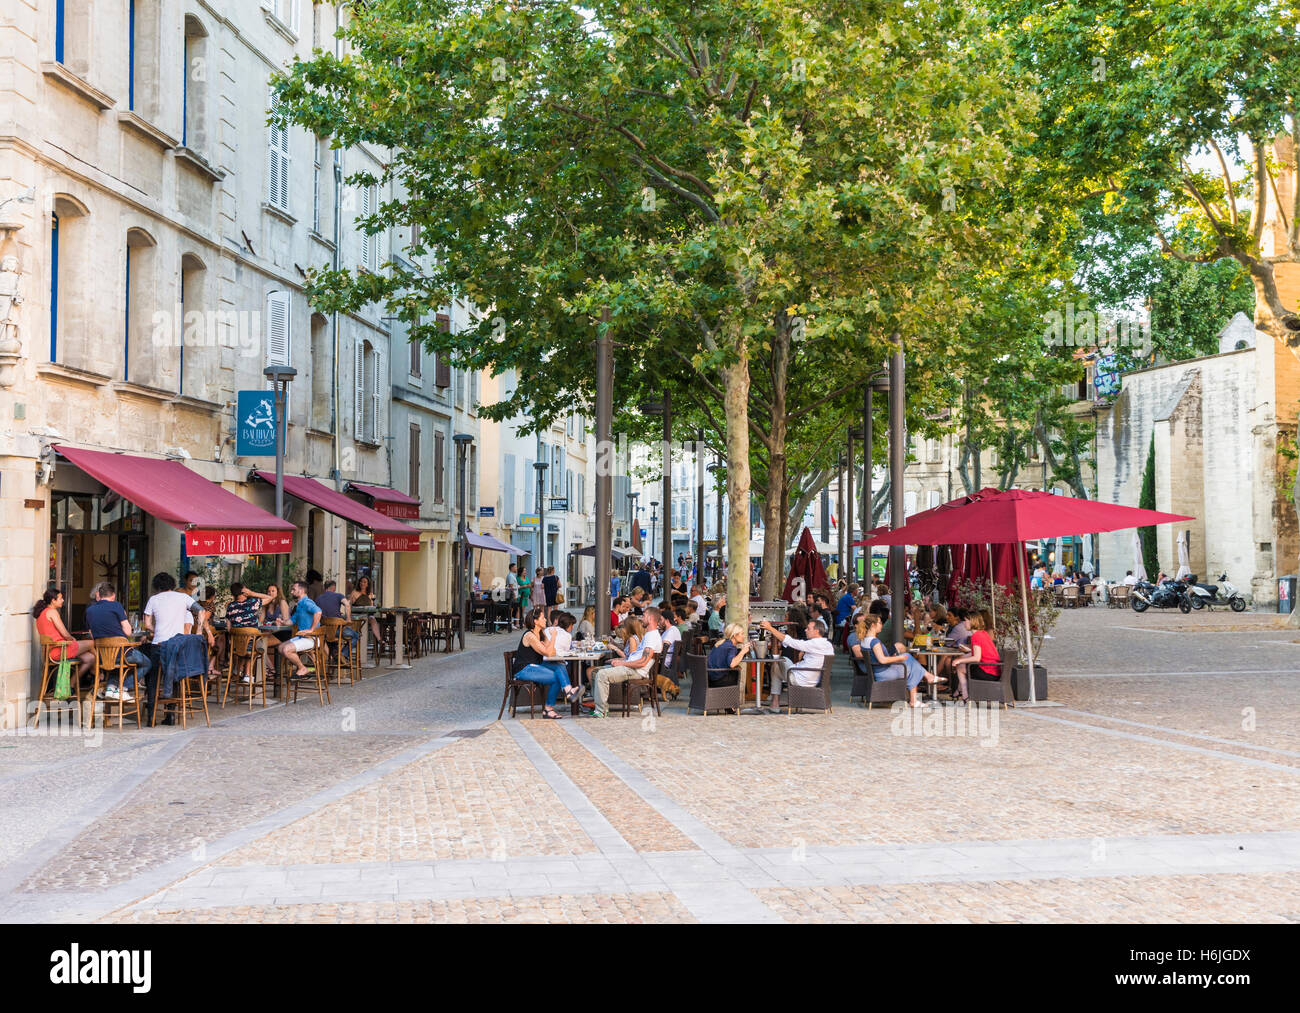 People eating at restaurant outdoor tables in the early evening at Place des Corps-Saints, Avignon, France Stock Photo